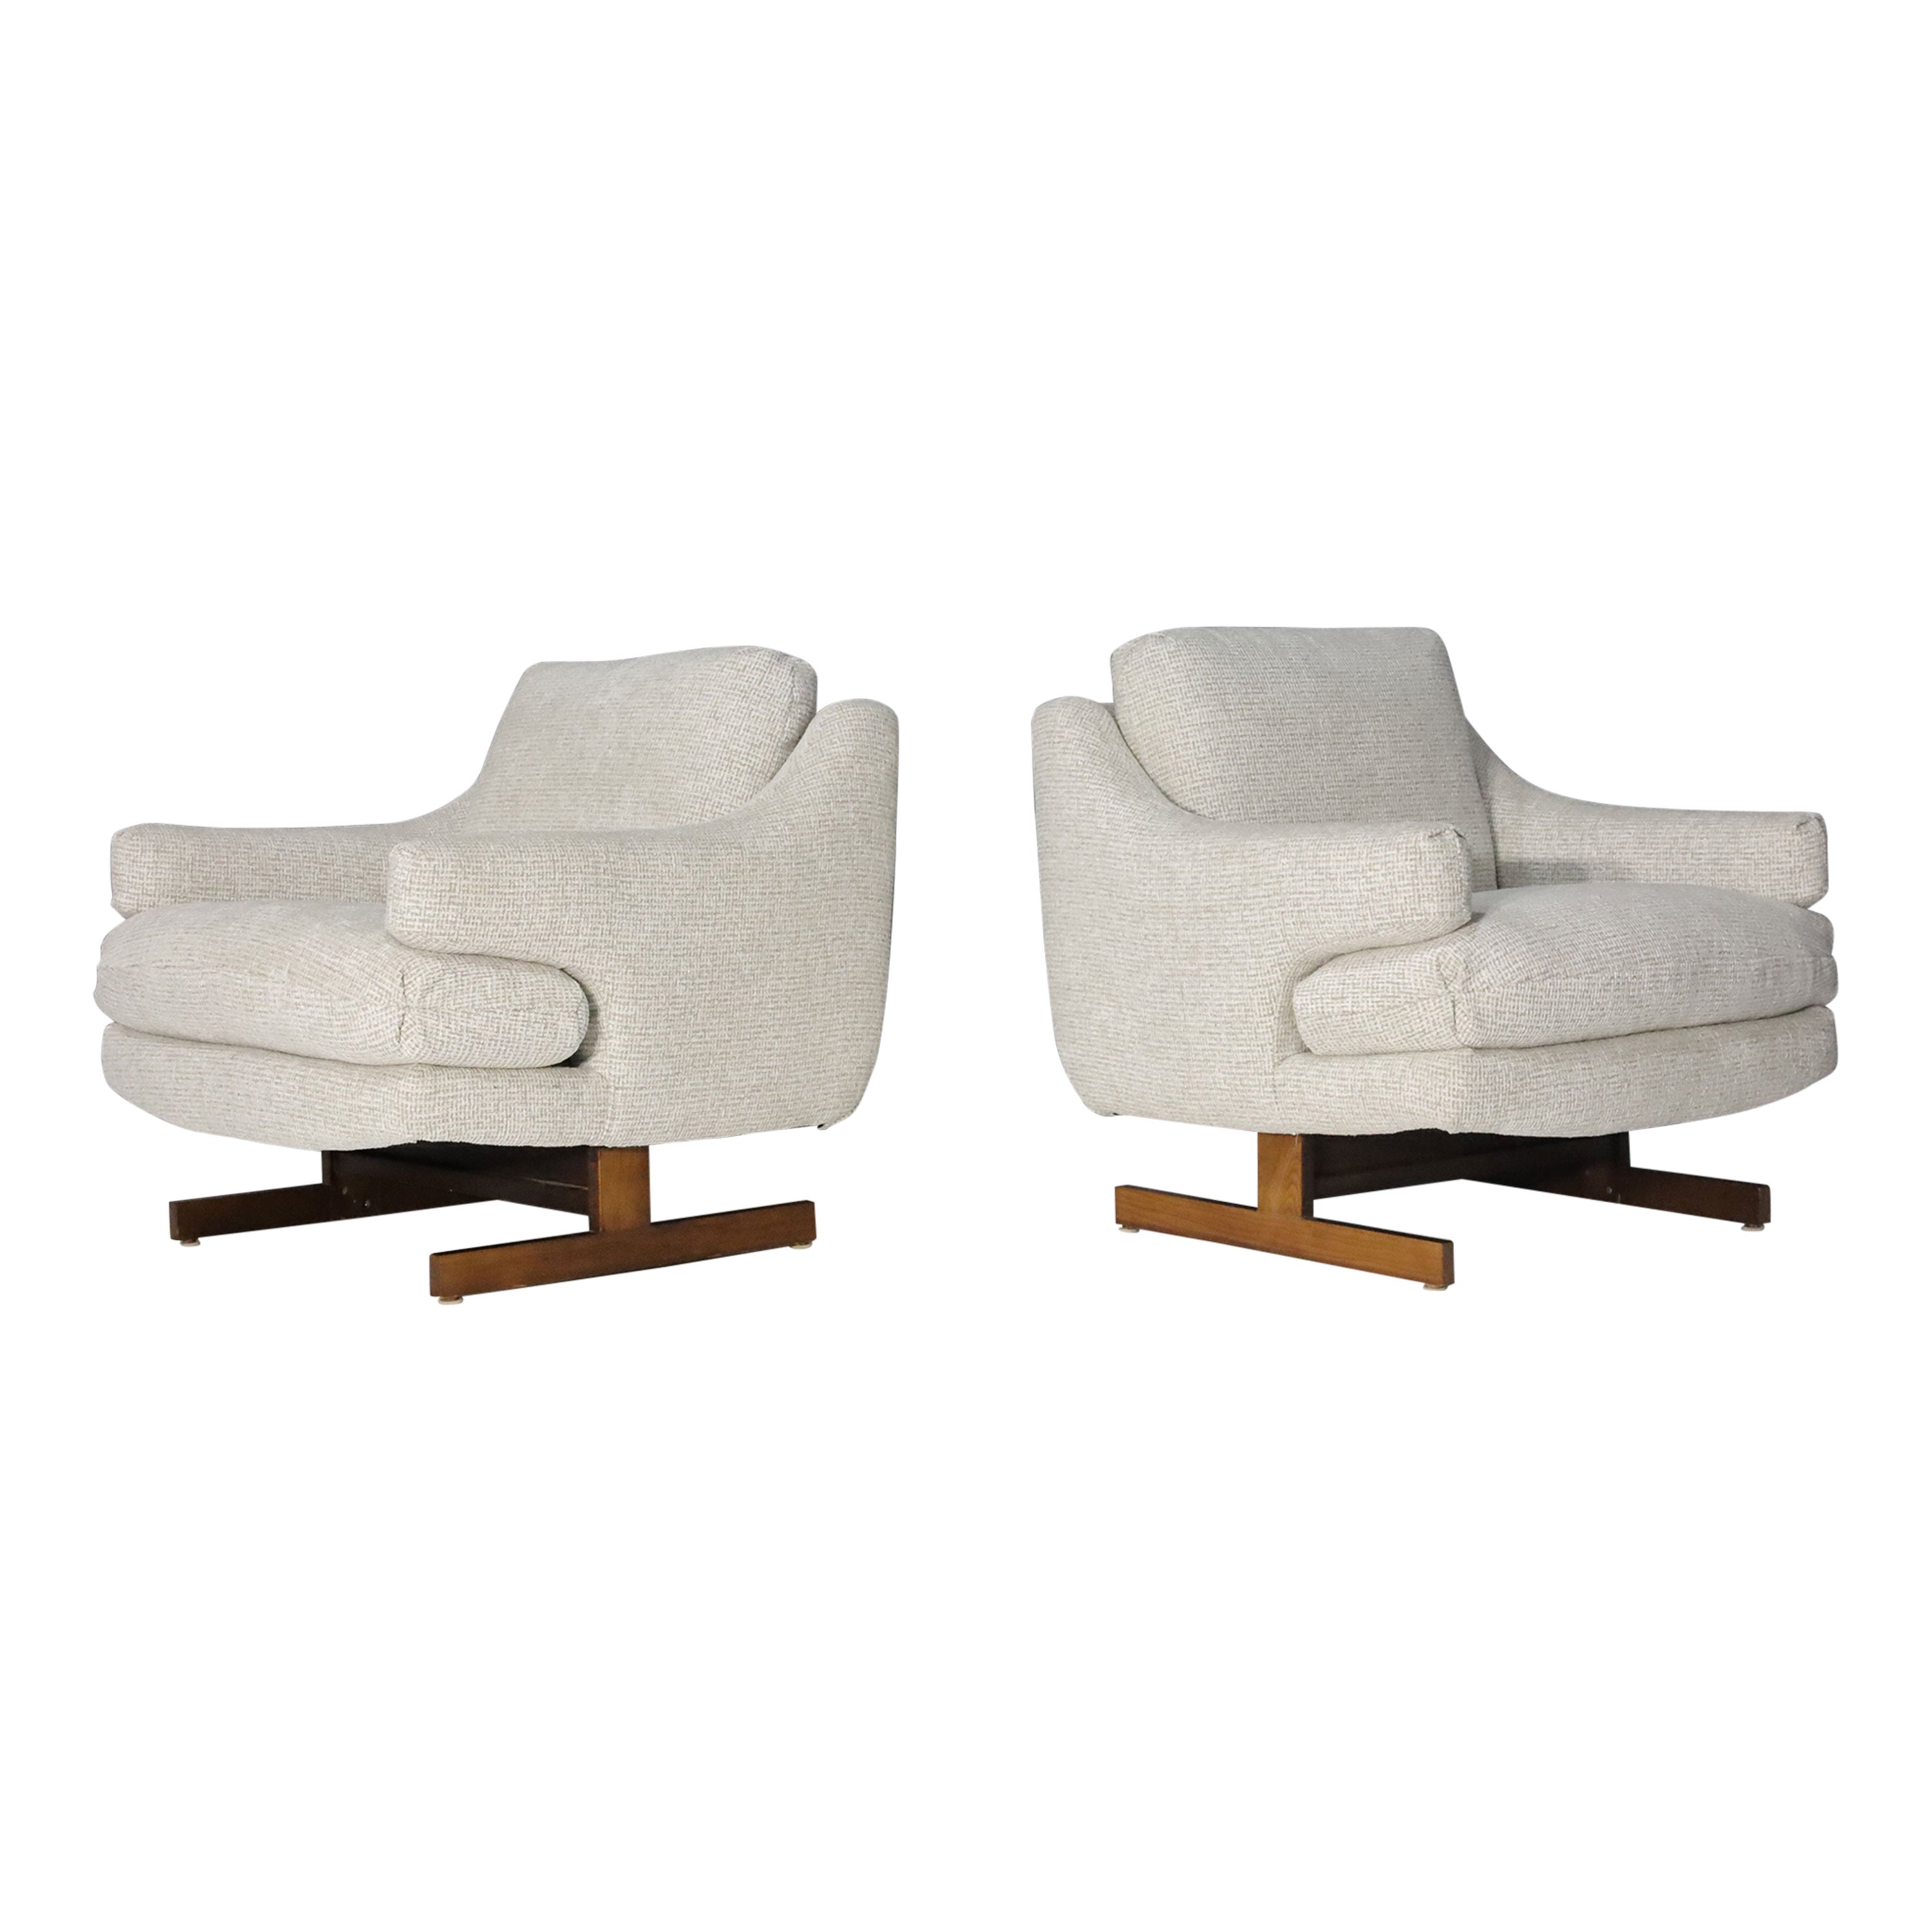 Milo Baughman Style Lounge Chairs with T-Leg Walnut Base and New Upholstery For Sale